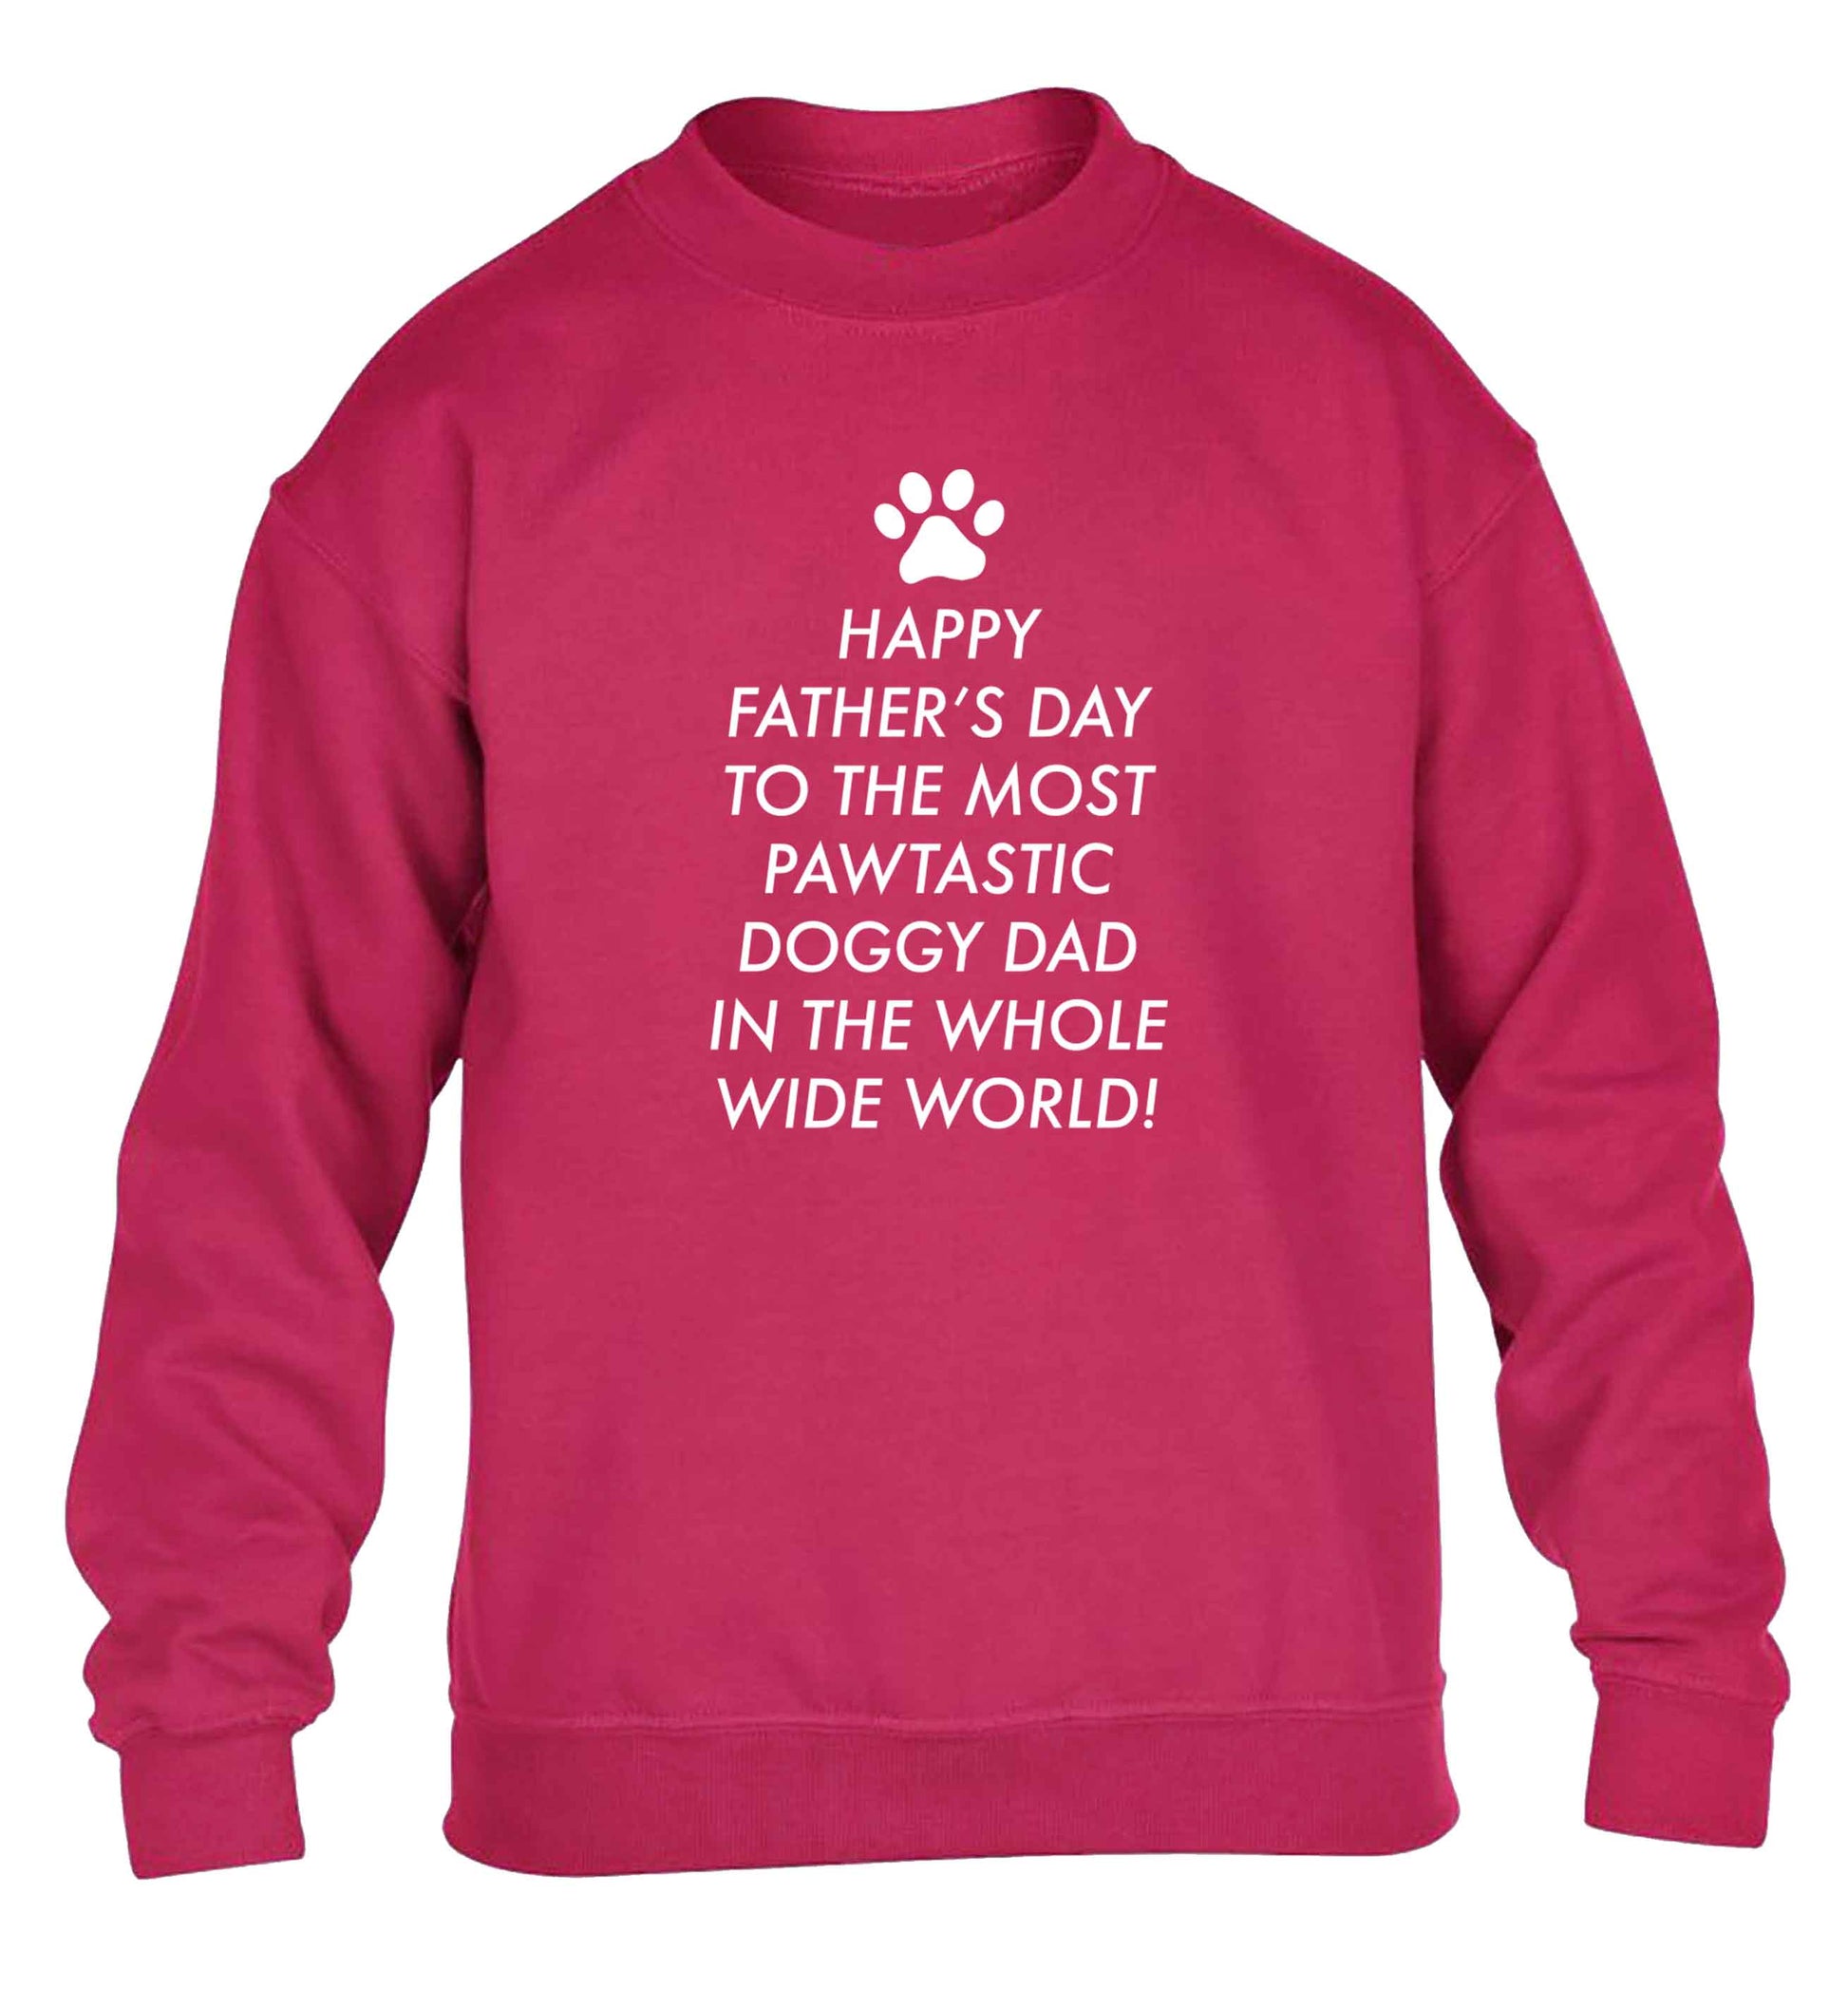 Happy Father's day to the most pawtastic doggy dad in the whole wide world!children's pink sweater 12-13 Years